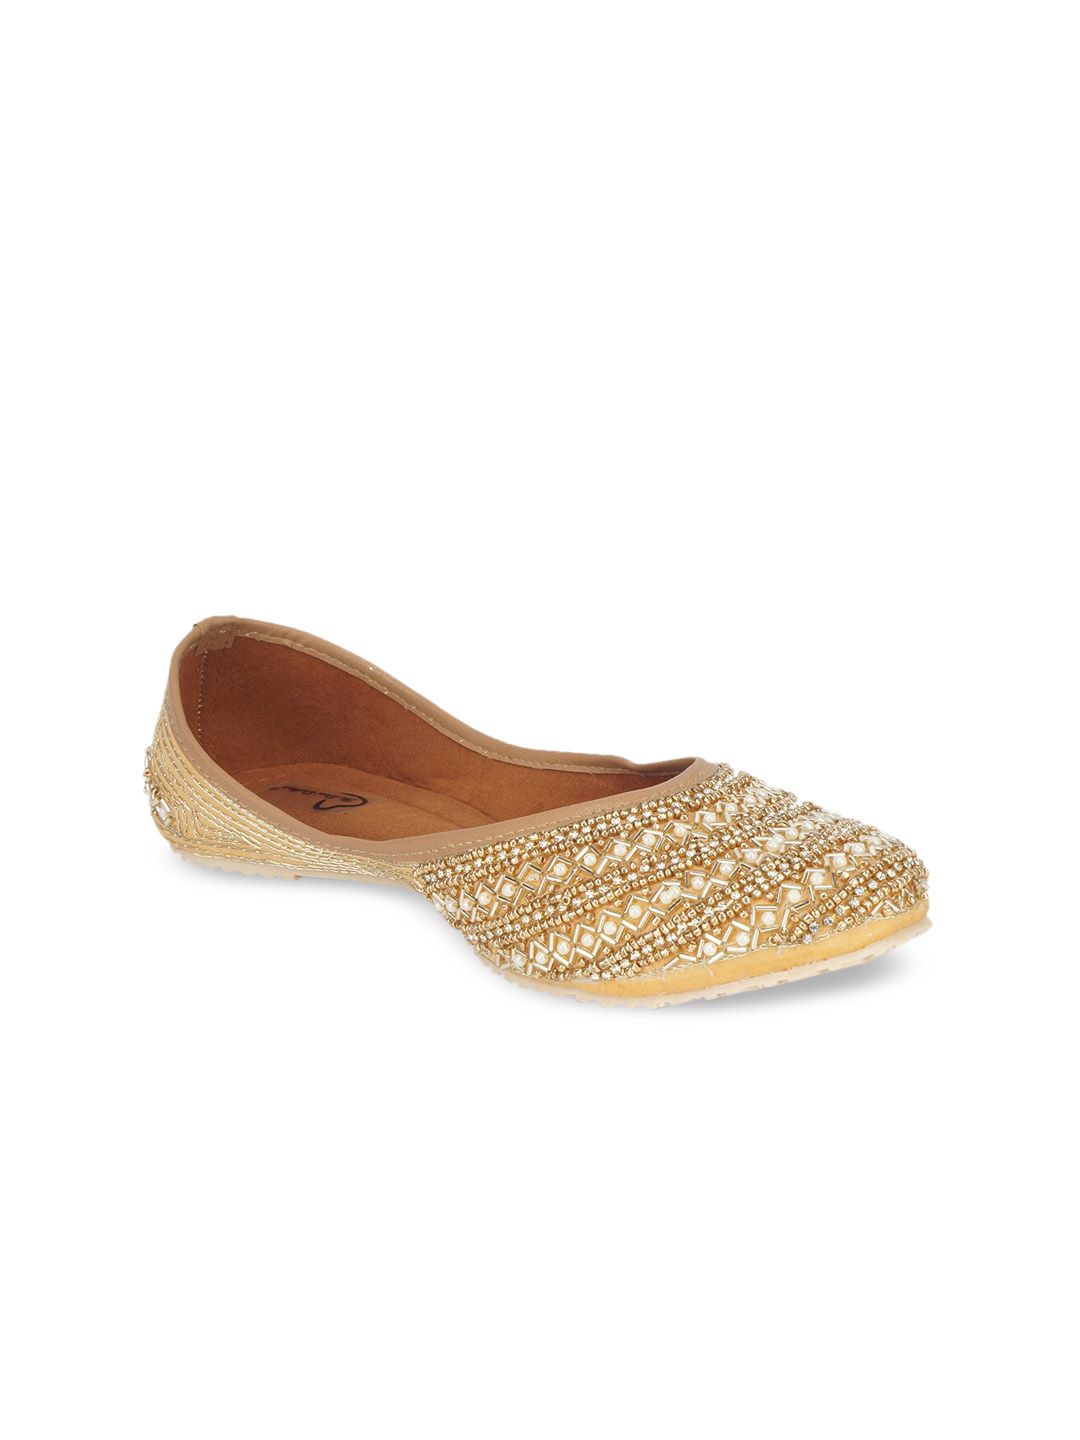 The Desi Dulhan Women Gold-Toned Embellished Ethnic Mojaris Flats Price in India